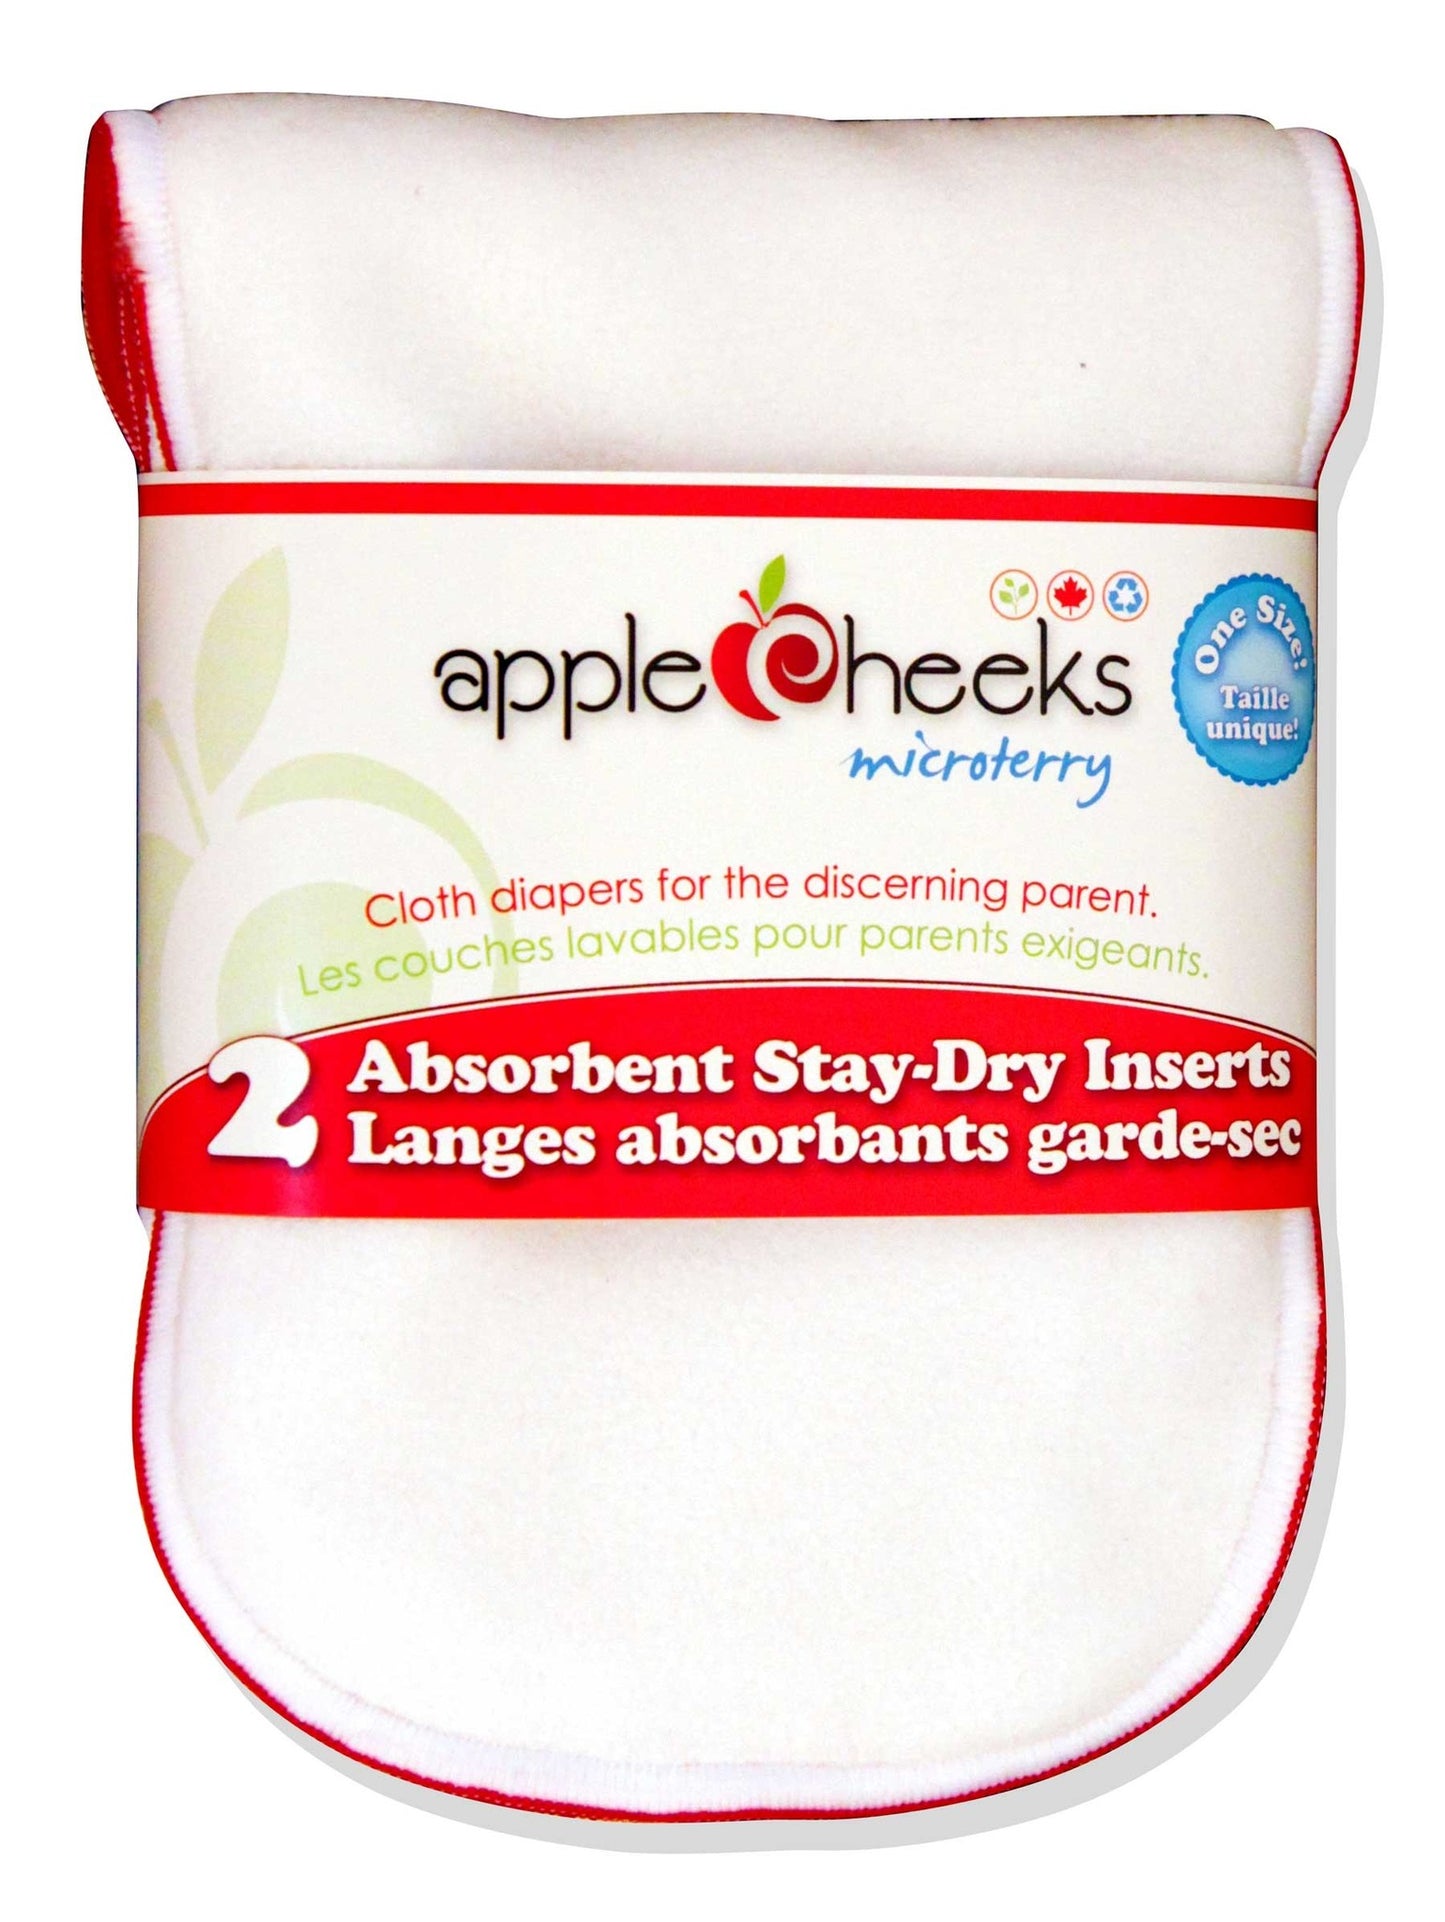 Apple Cheeks Microterry Insert